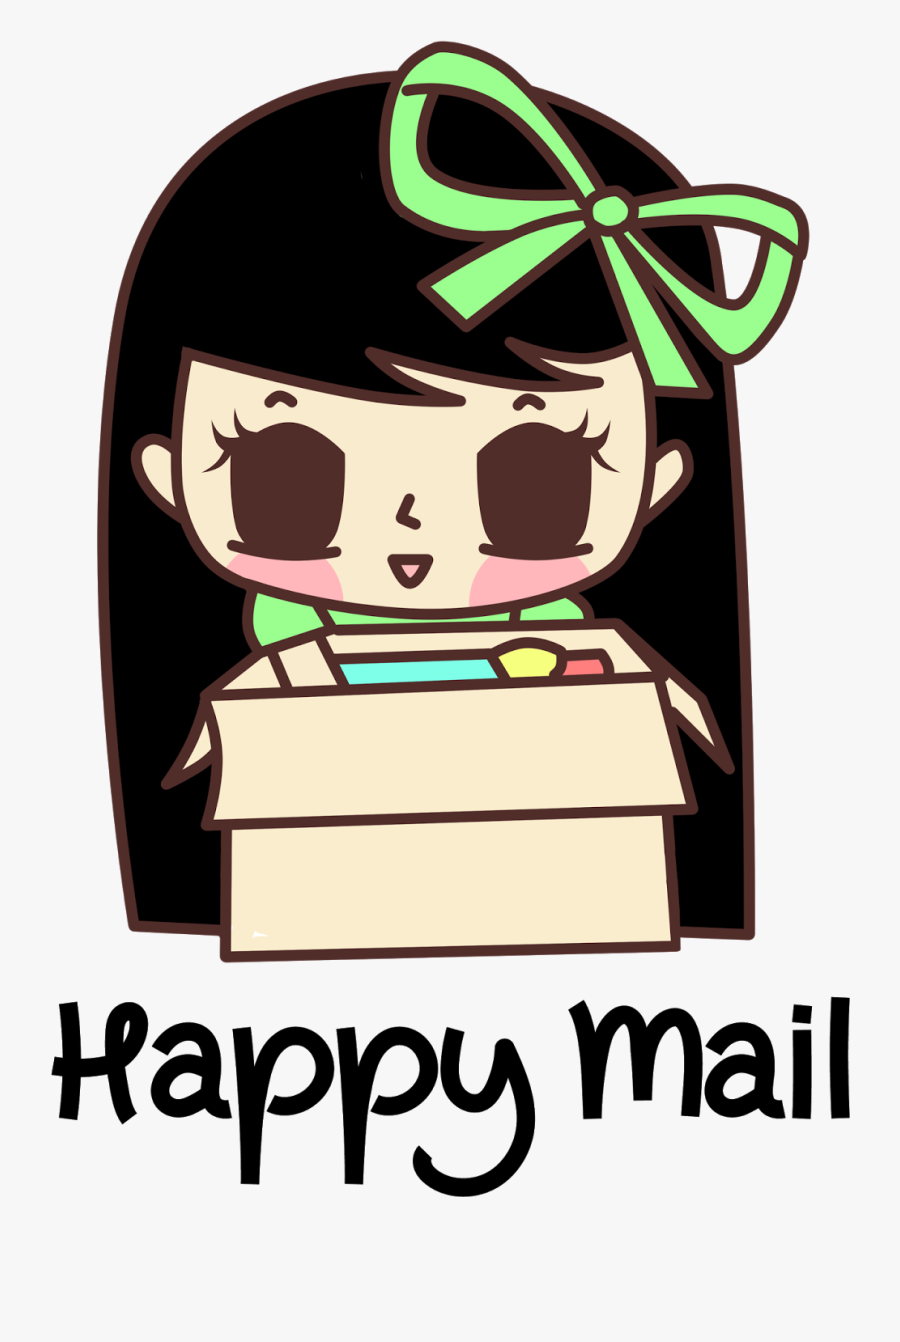 Mail Clipart Happy Mail - Cartoon, Transparent Clipart